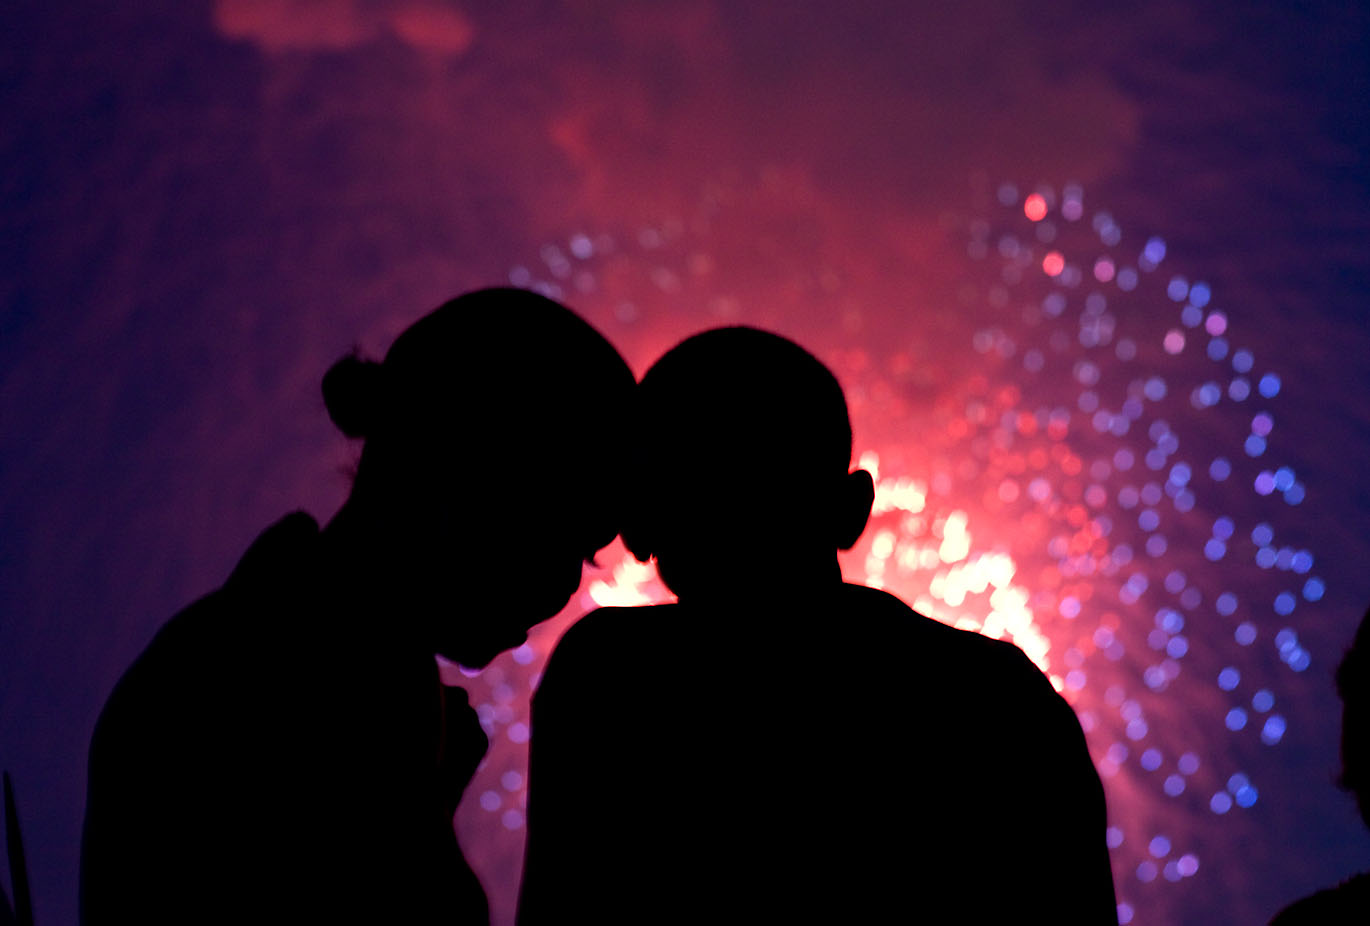 President Barack Obama and First Lady Michelle Obama watch fireworks